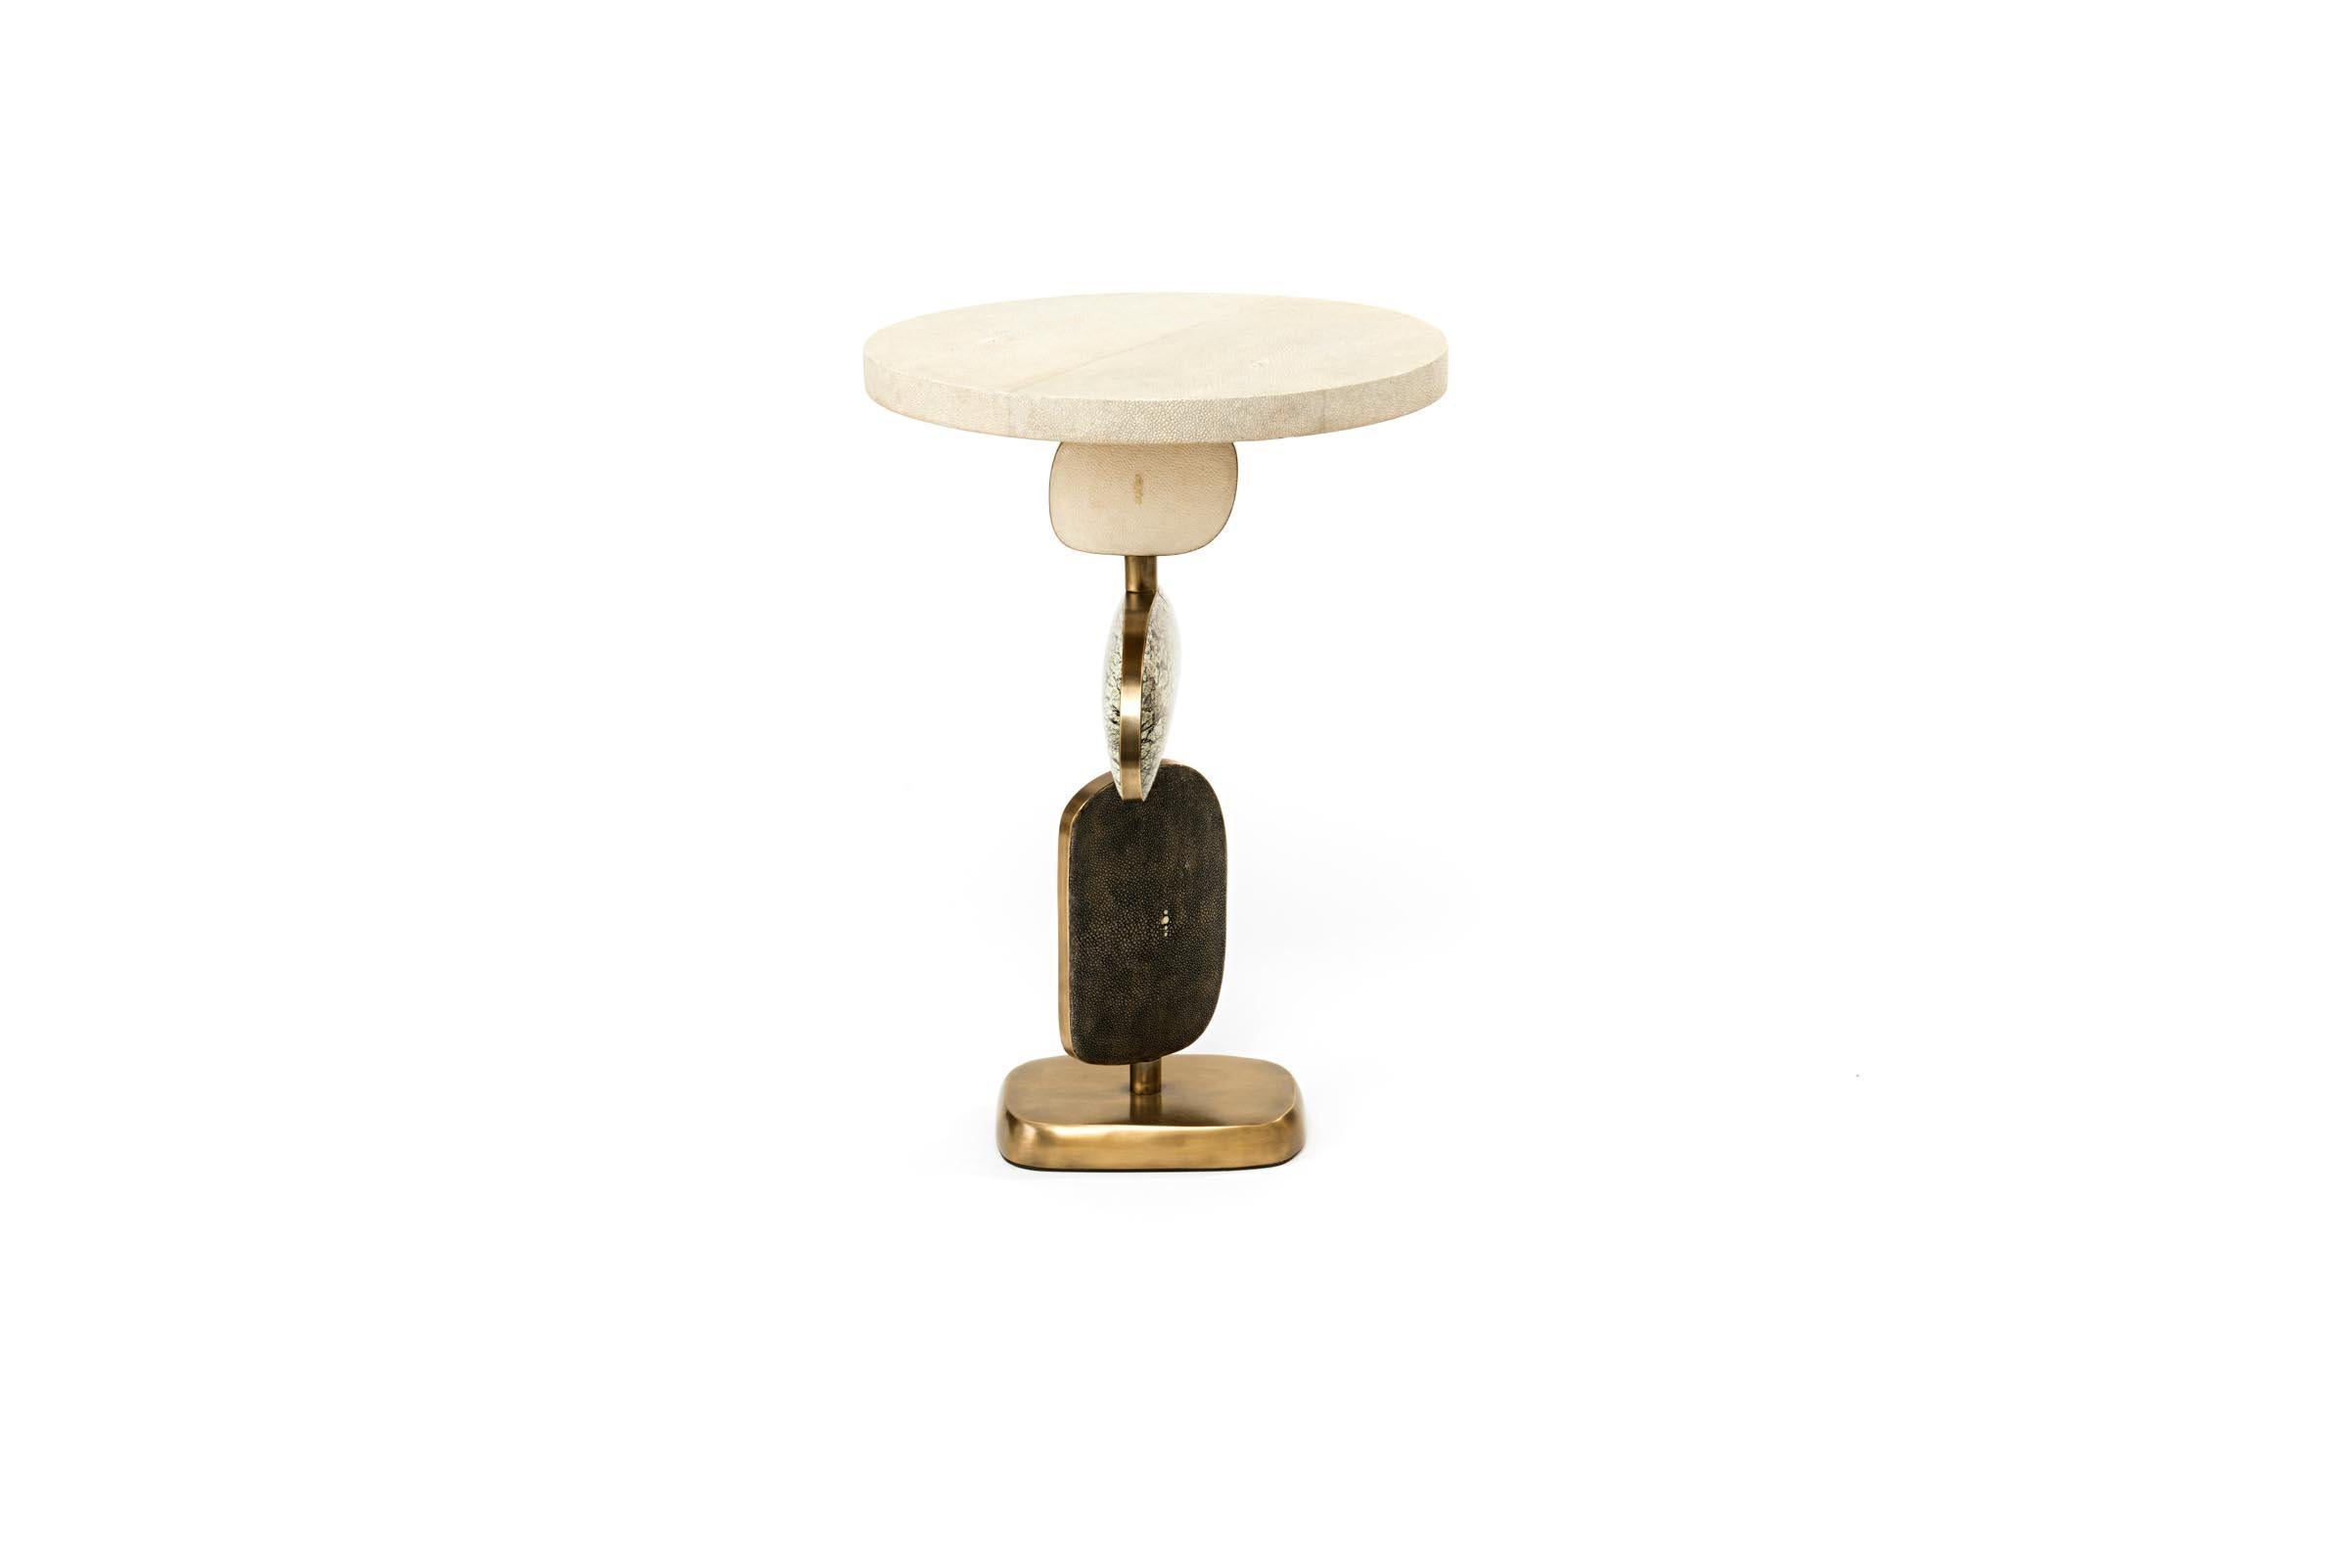 Hand-Crafted Shagreen Side Table with Mobile Sculptural Parts and Brass Accents by Kifu Paris For Sale